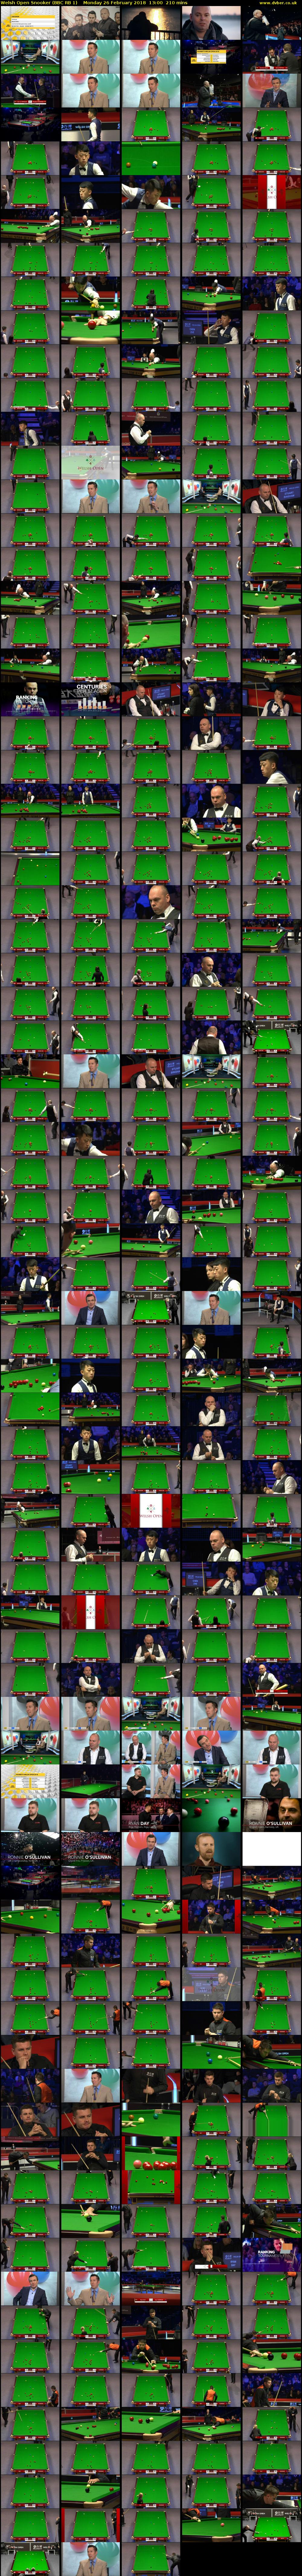 Welsh Open Snooker (BBC RB 1) Monday 26 February 2018 13:00 - 16:30